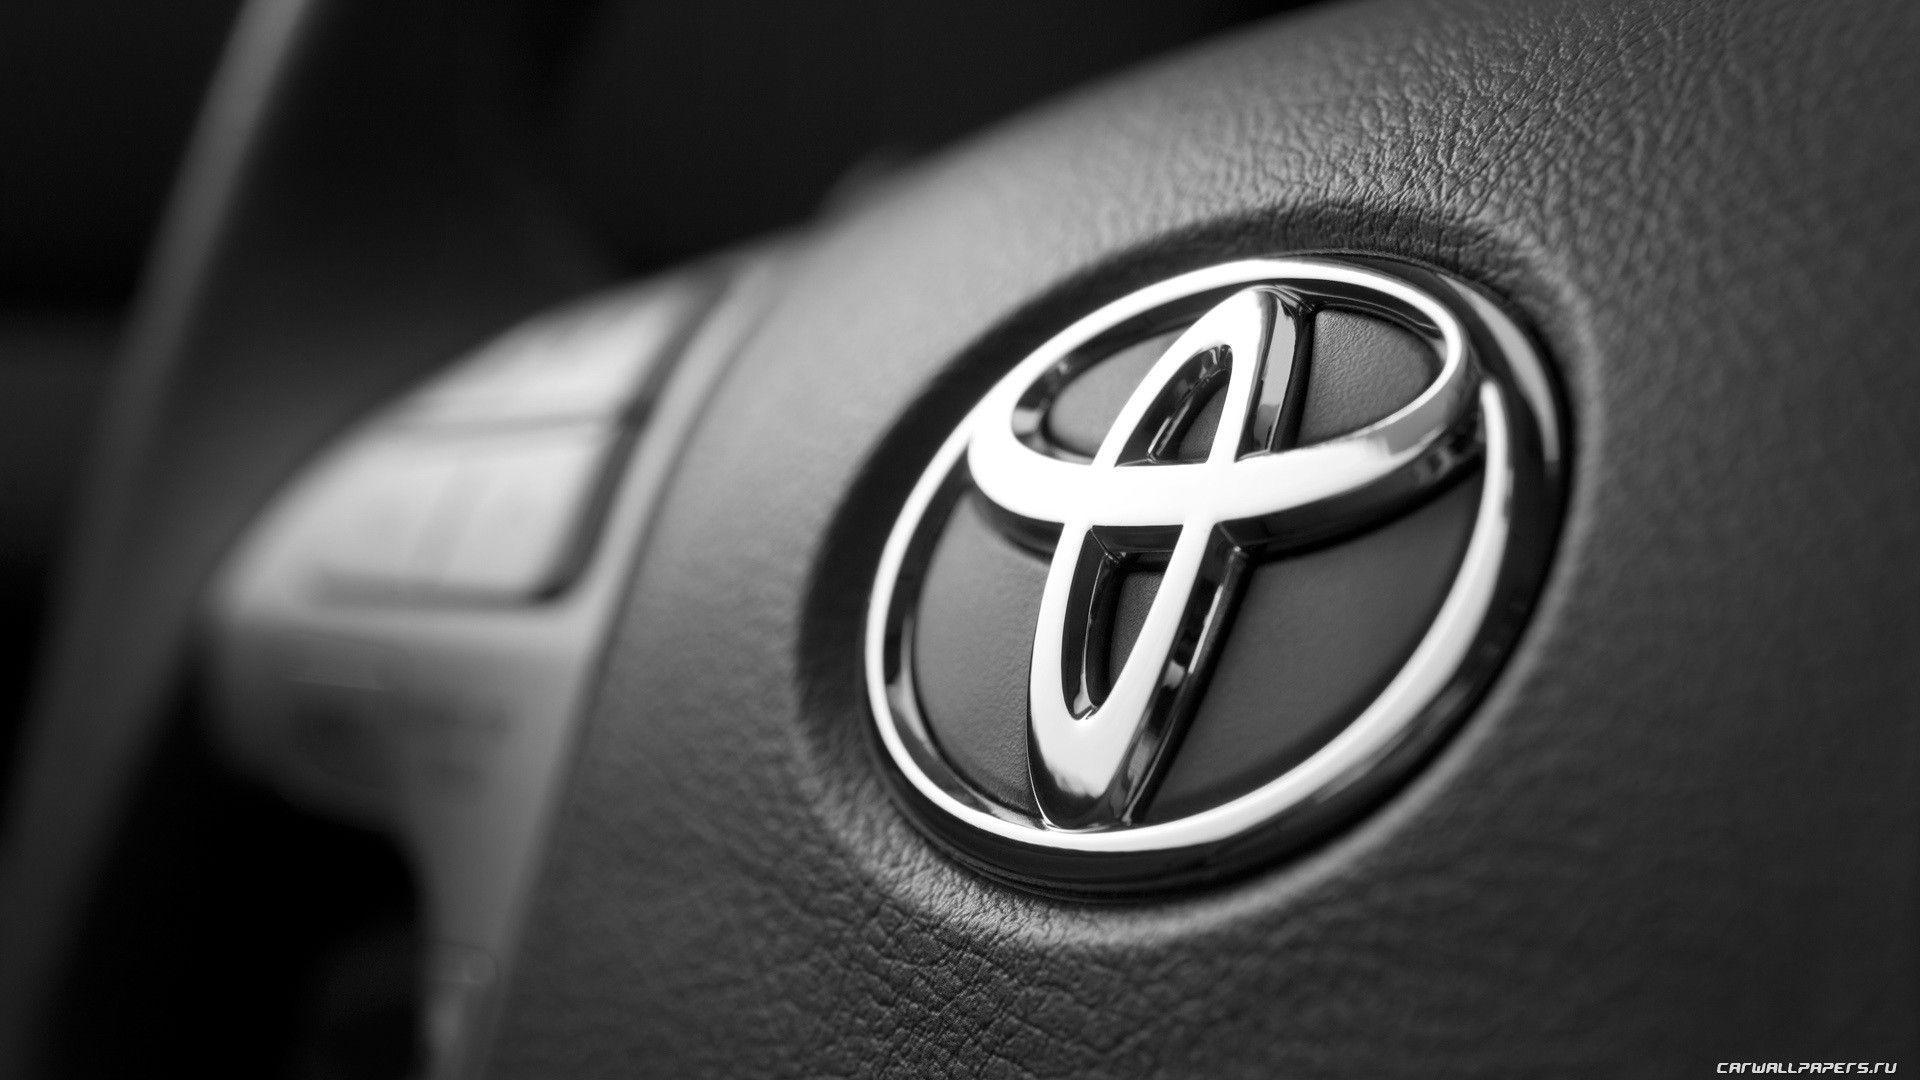 Over 2K Stunning Toyota Wallpapers Wallpaper For Free Download